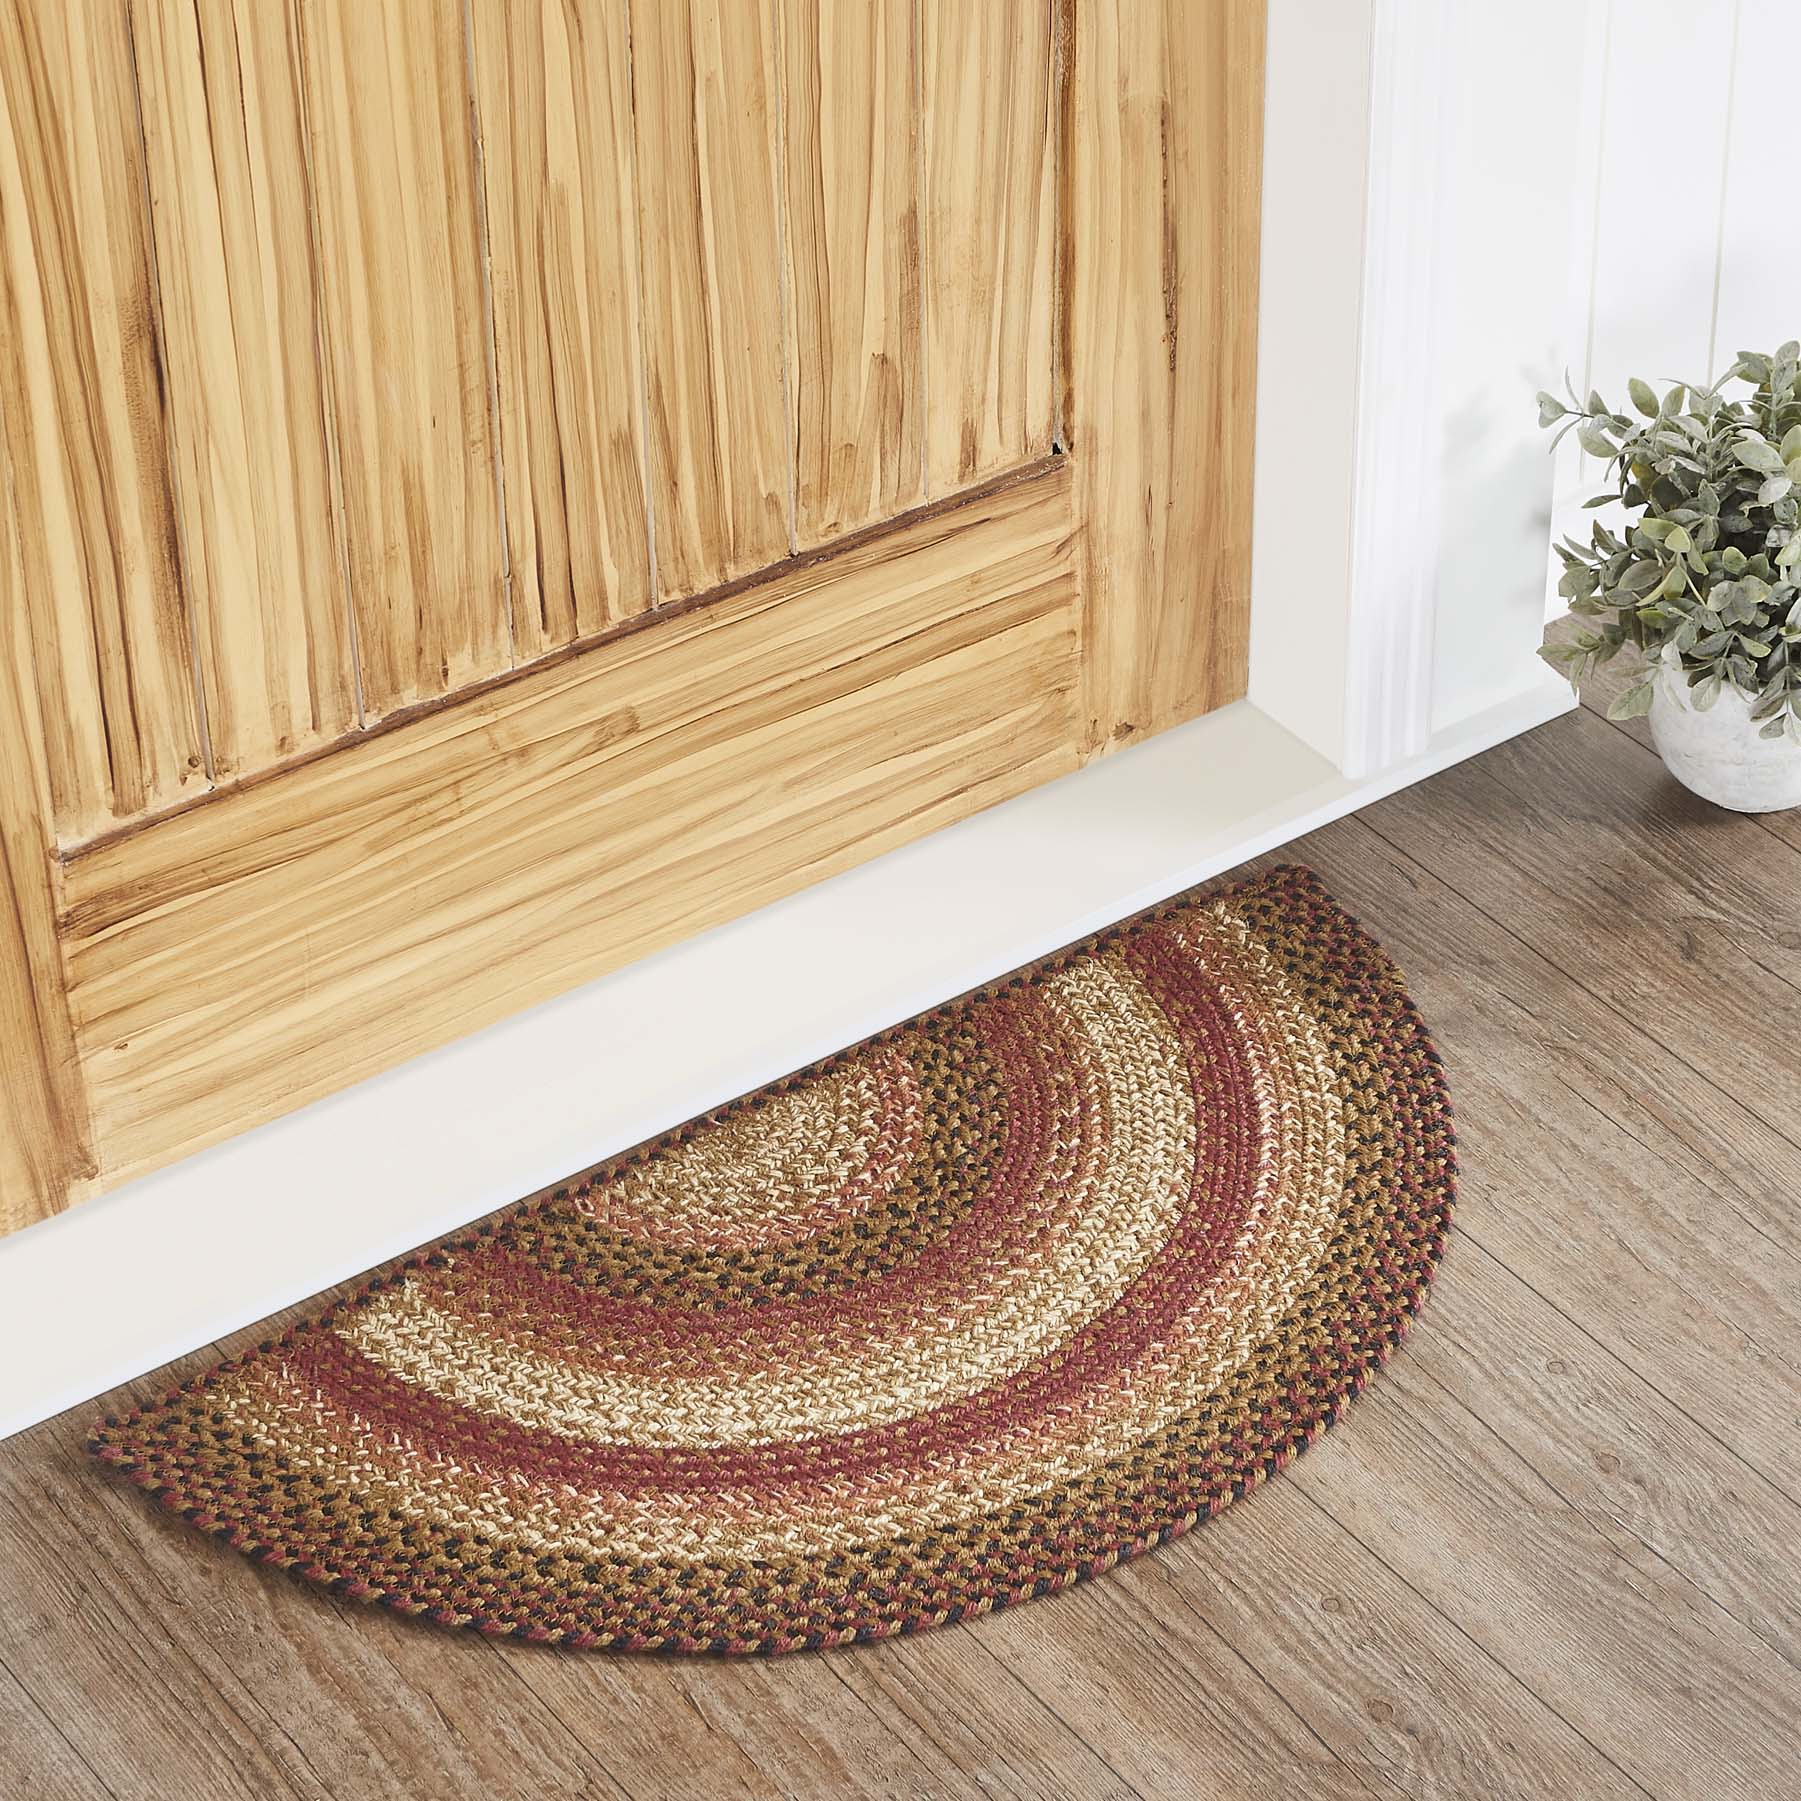 Ginger Spice Jute Braided Rug Half Circle with Rug Pad 16.5"x33" VHC Brands